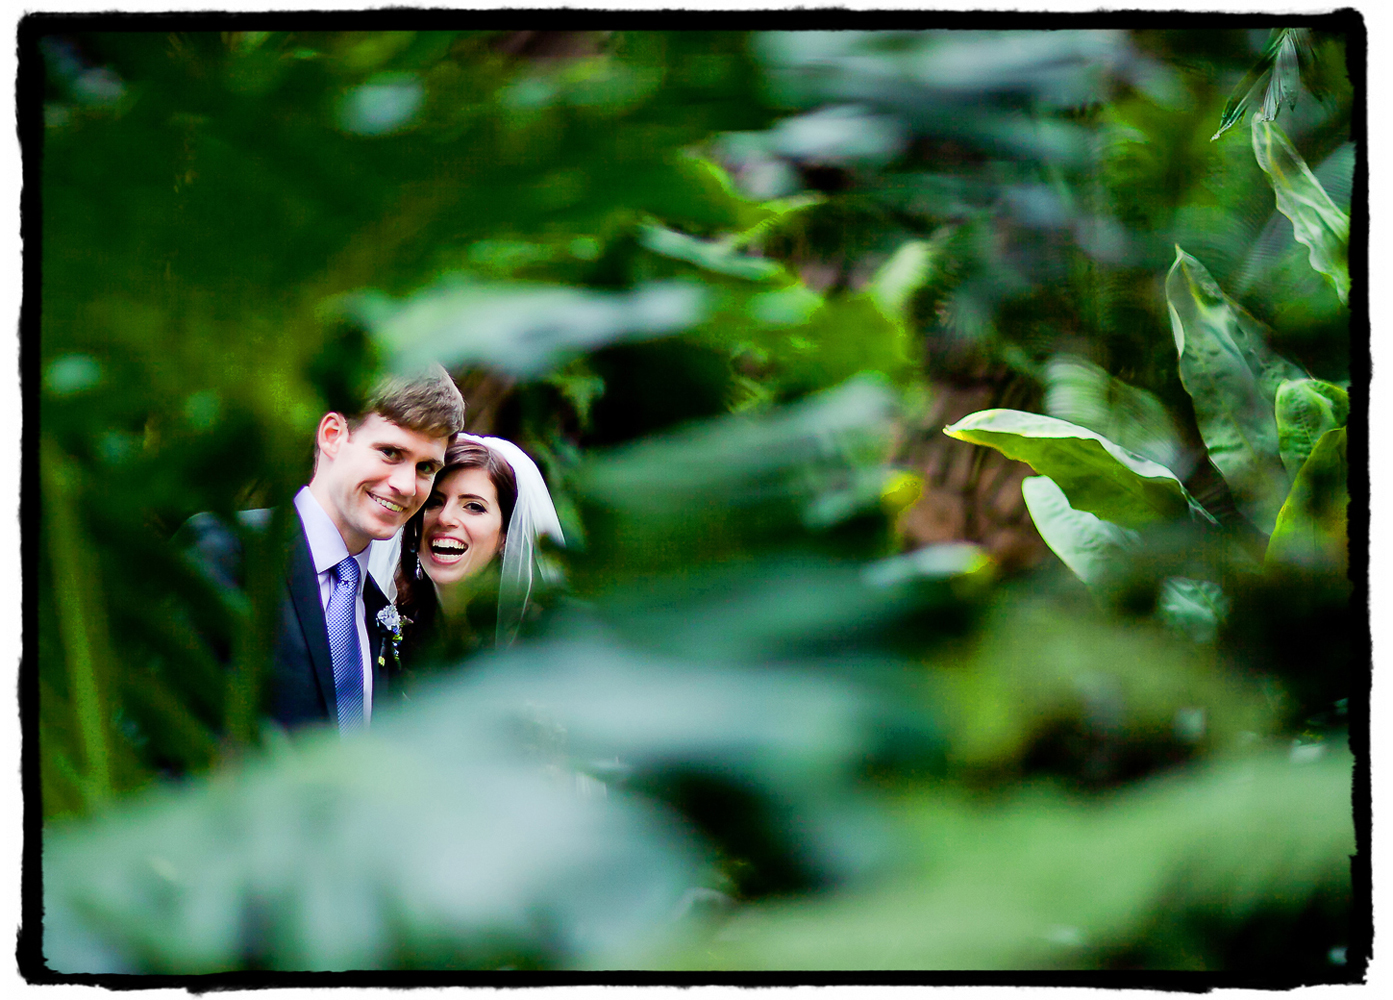 I shot this portrait through the foliage at Brooklyn Botanic Garden. I love the bokeh framing them in foreground and background.